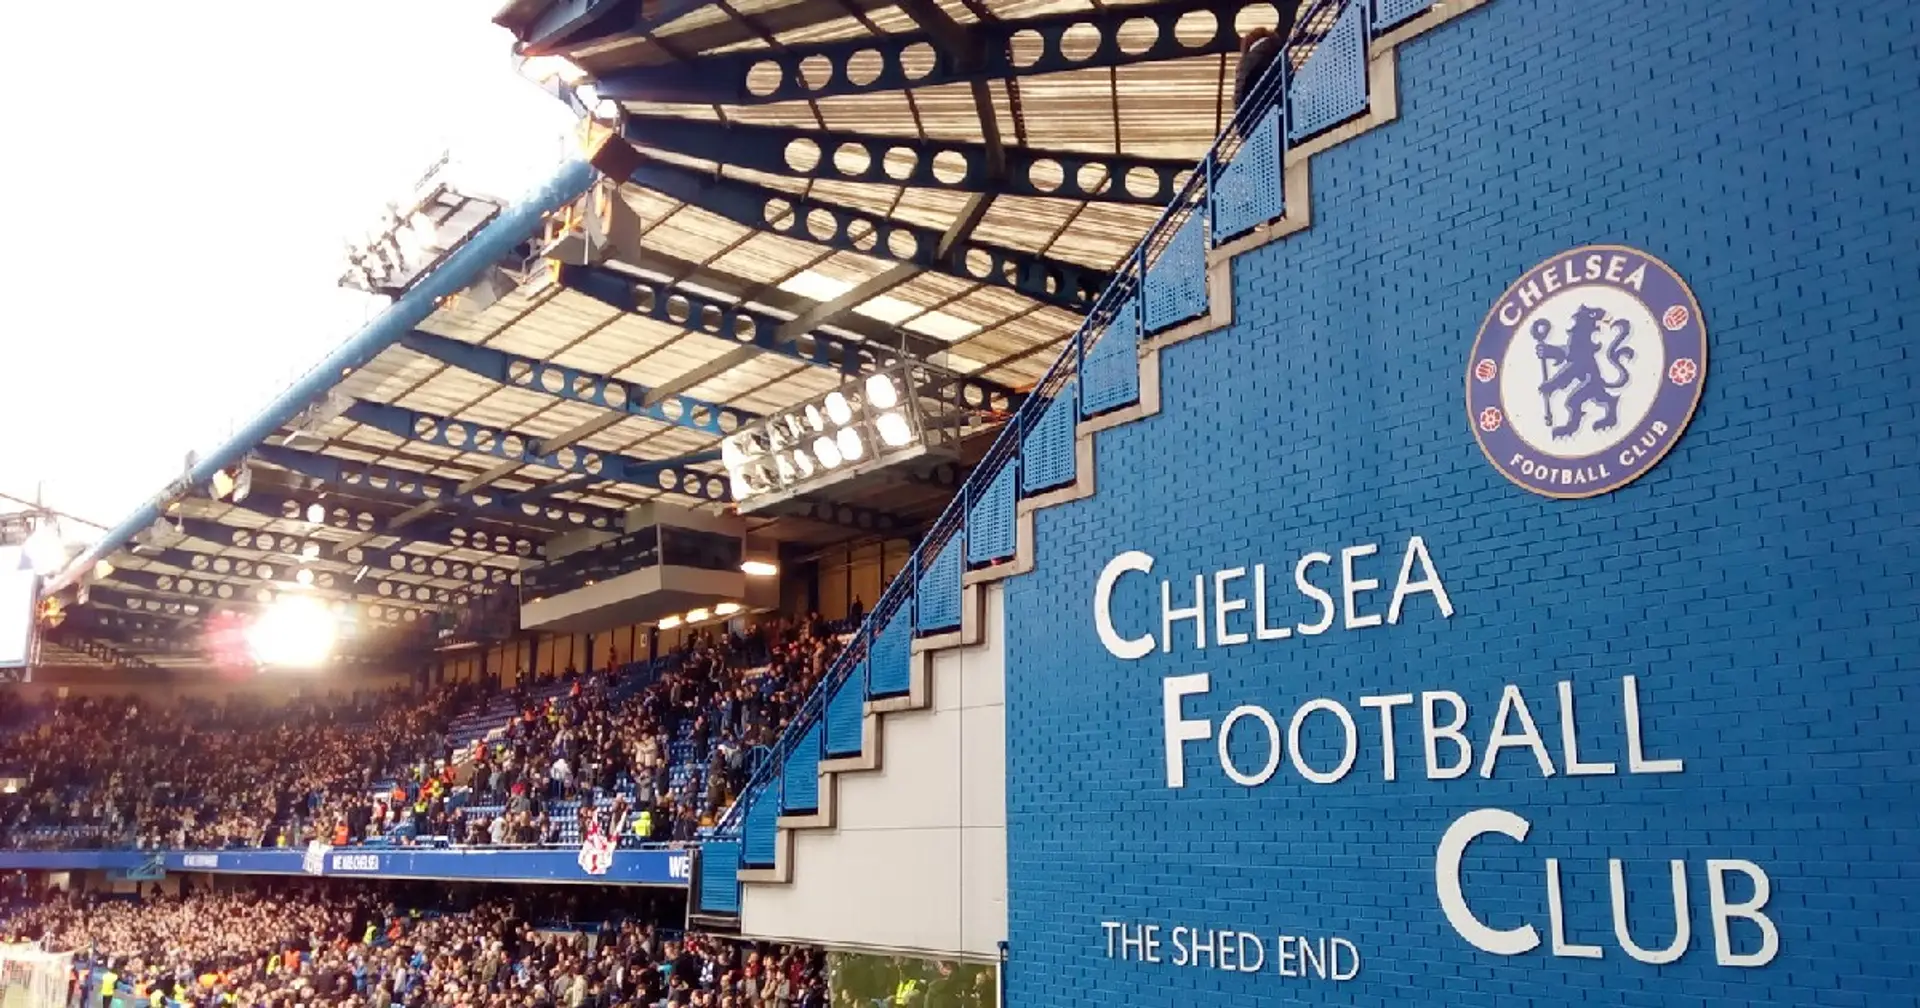 Chelsea consider selling stake in women's team, valuation revealed